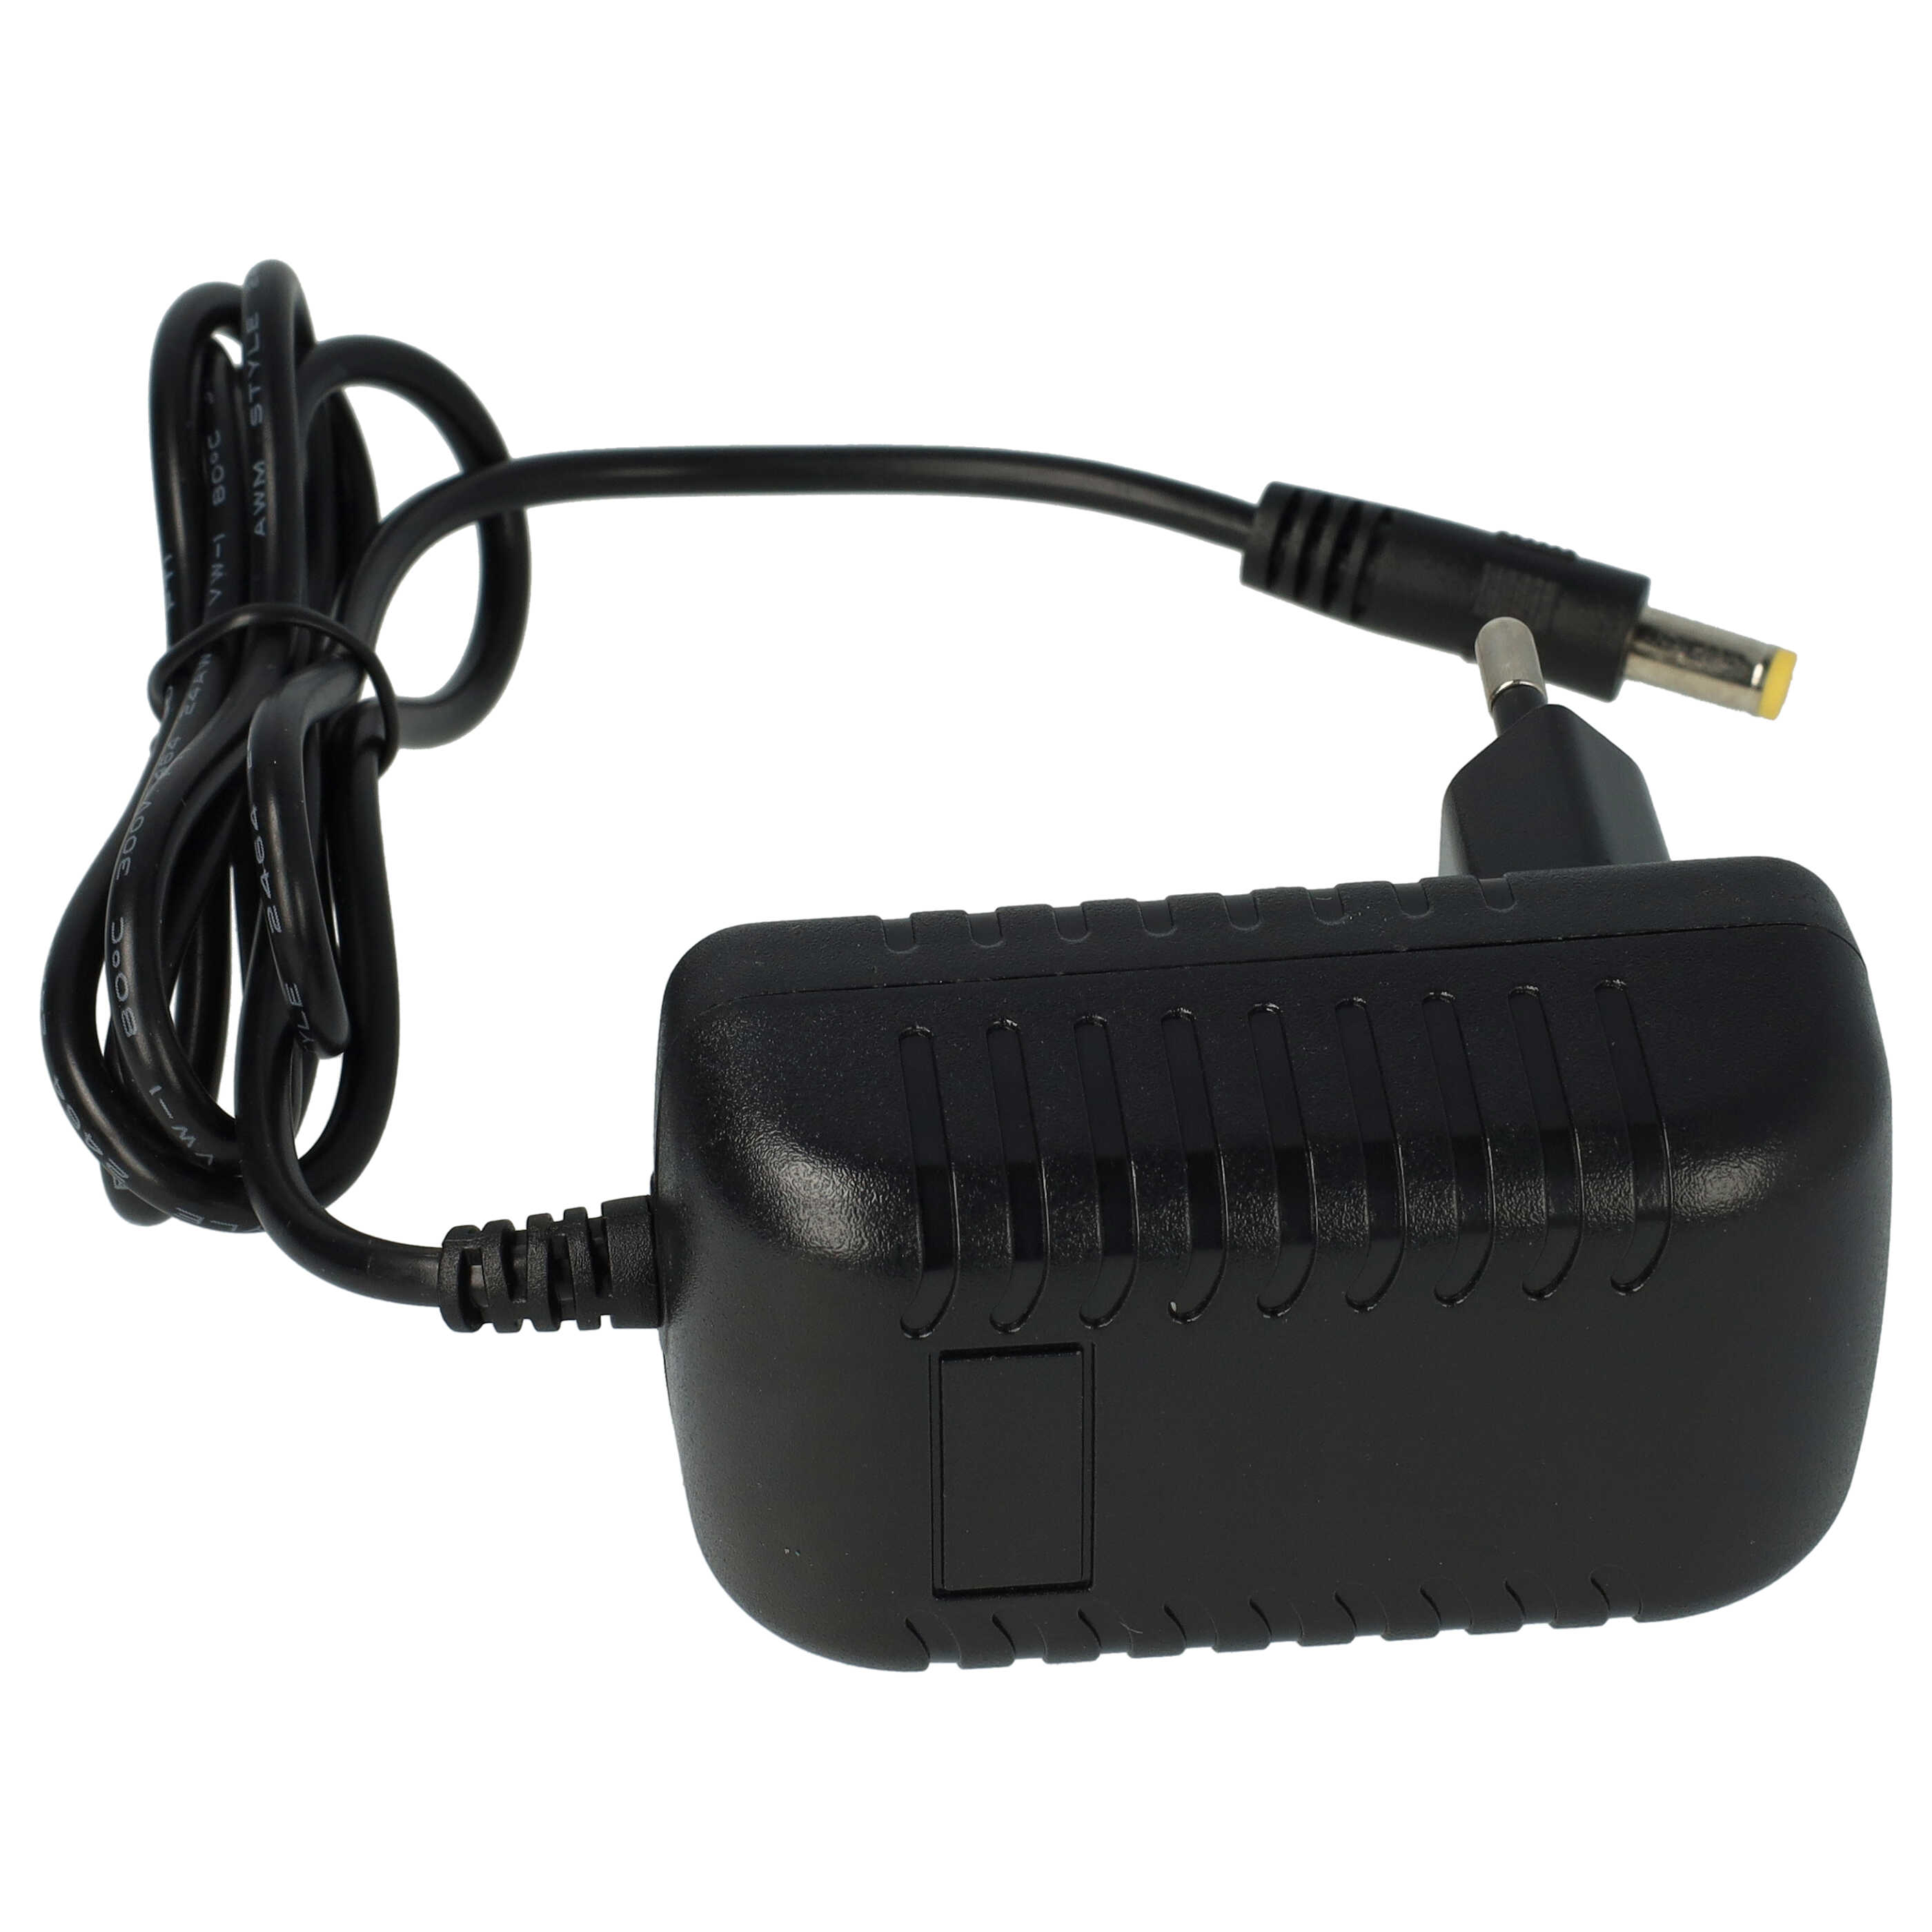 Mains Power Adapter suitable for 6490 AVM hard drive, speakers, router etc. - 115 cm